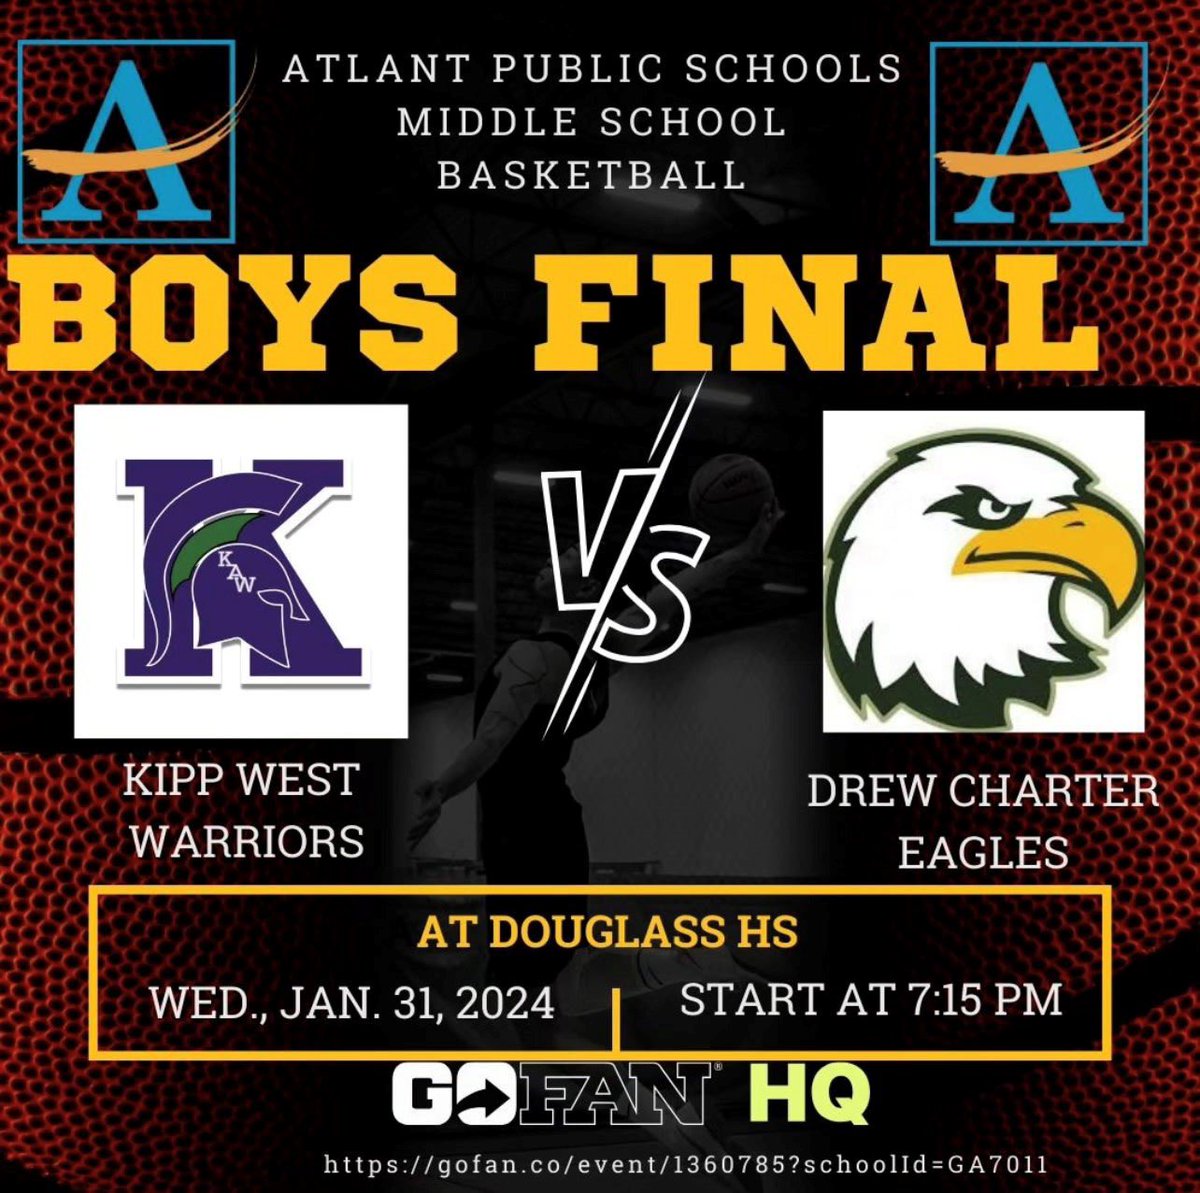 Thrilled that our @DrewCharter Eagles will compete in the Atlanta Public Schools Middle School Basketball Finals against the KIPP West Warriors. Go Eagles! #flyhigher 🦅